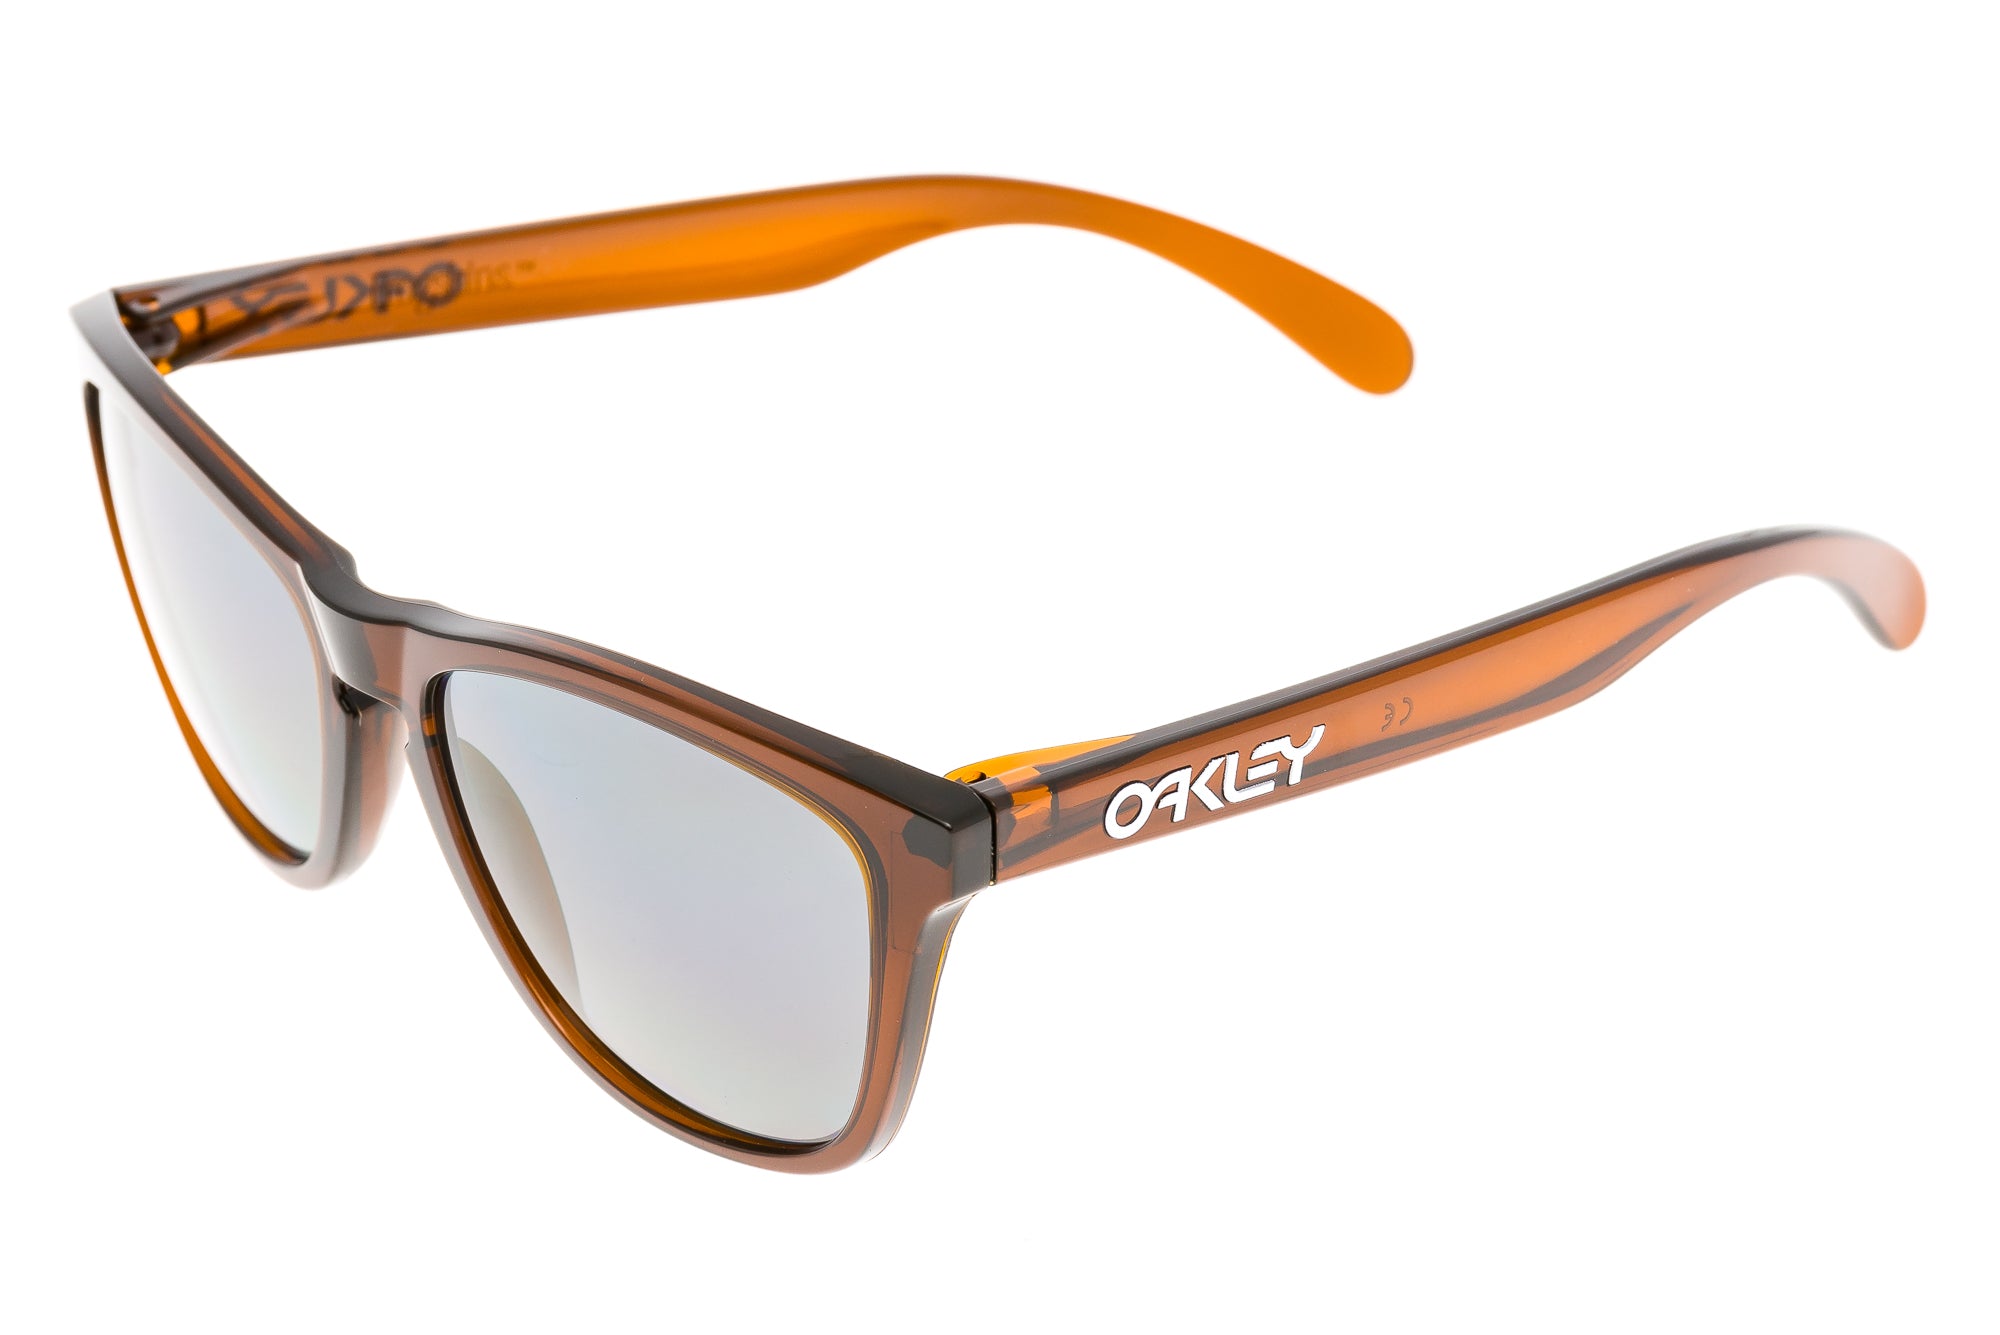 Oakley Frogskins Sunglasses Polished Rootbeer | Pro's Closet